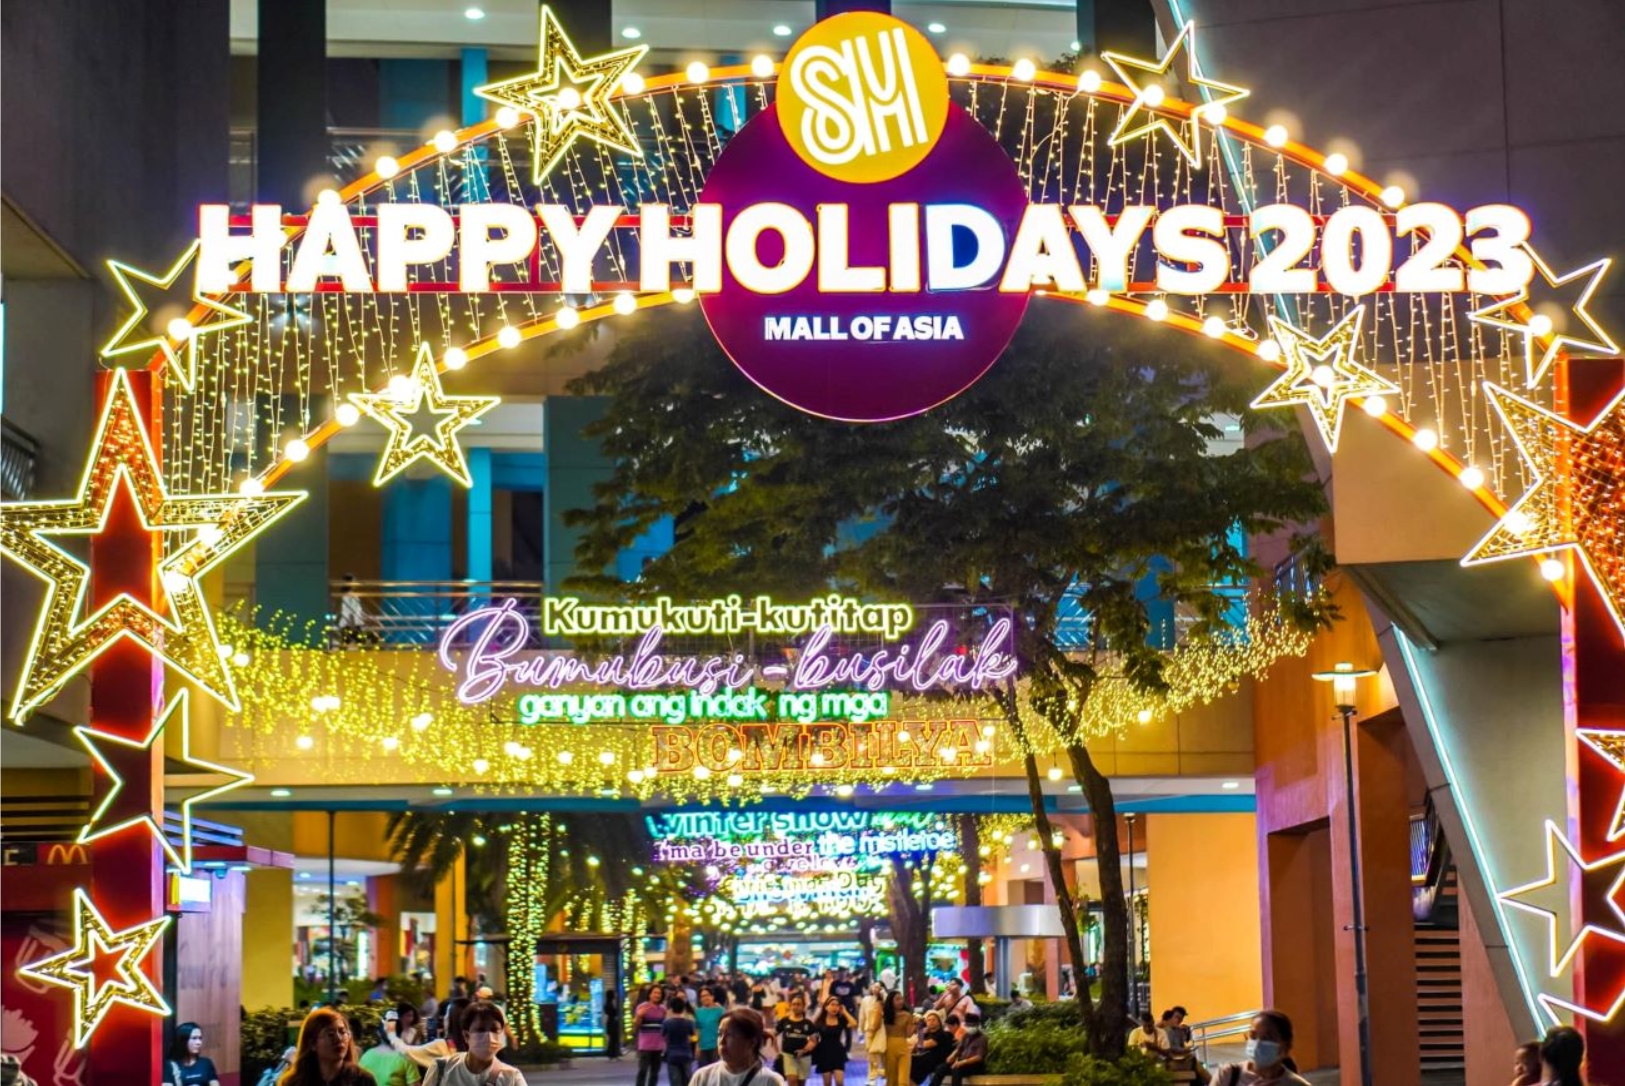 Shop, See, Eat, Do: Kickstart The Holiday Spirit With These Fun Things To Do At SM Mall Of Asia